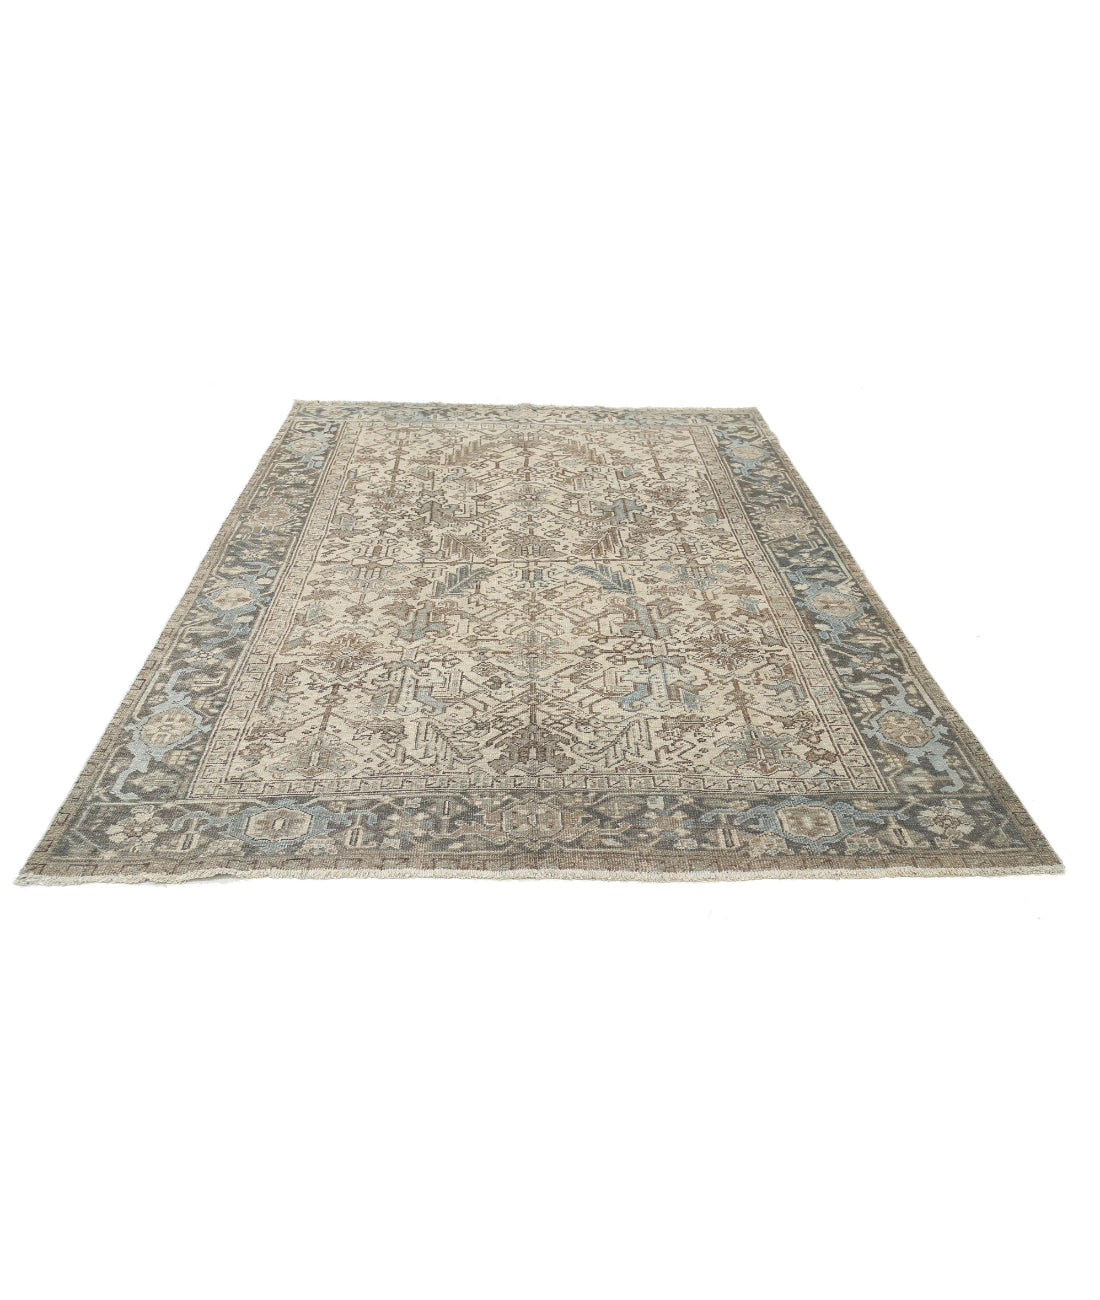 Hand Knotted Antique Persian Heriz Wool Rug - 6'10'' x 8'4'' 6'10'' x 8'4'' (205 X 250) / Ivory / Grey